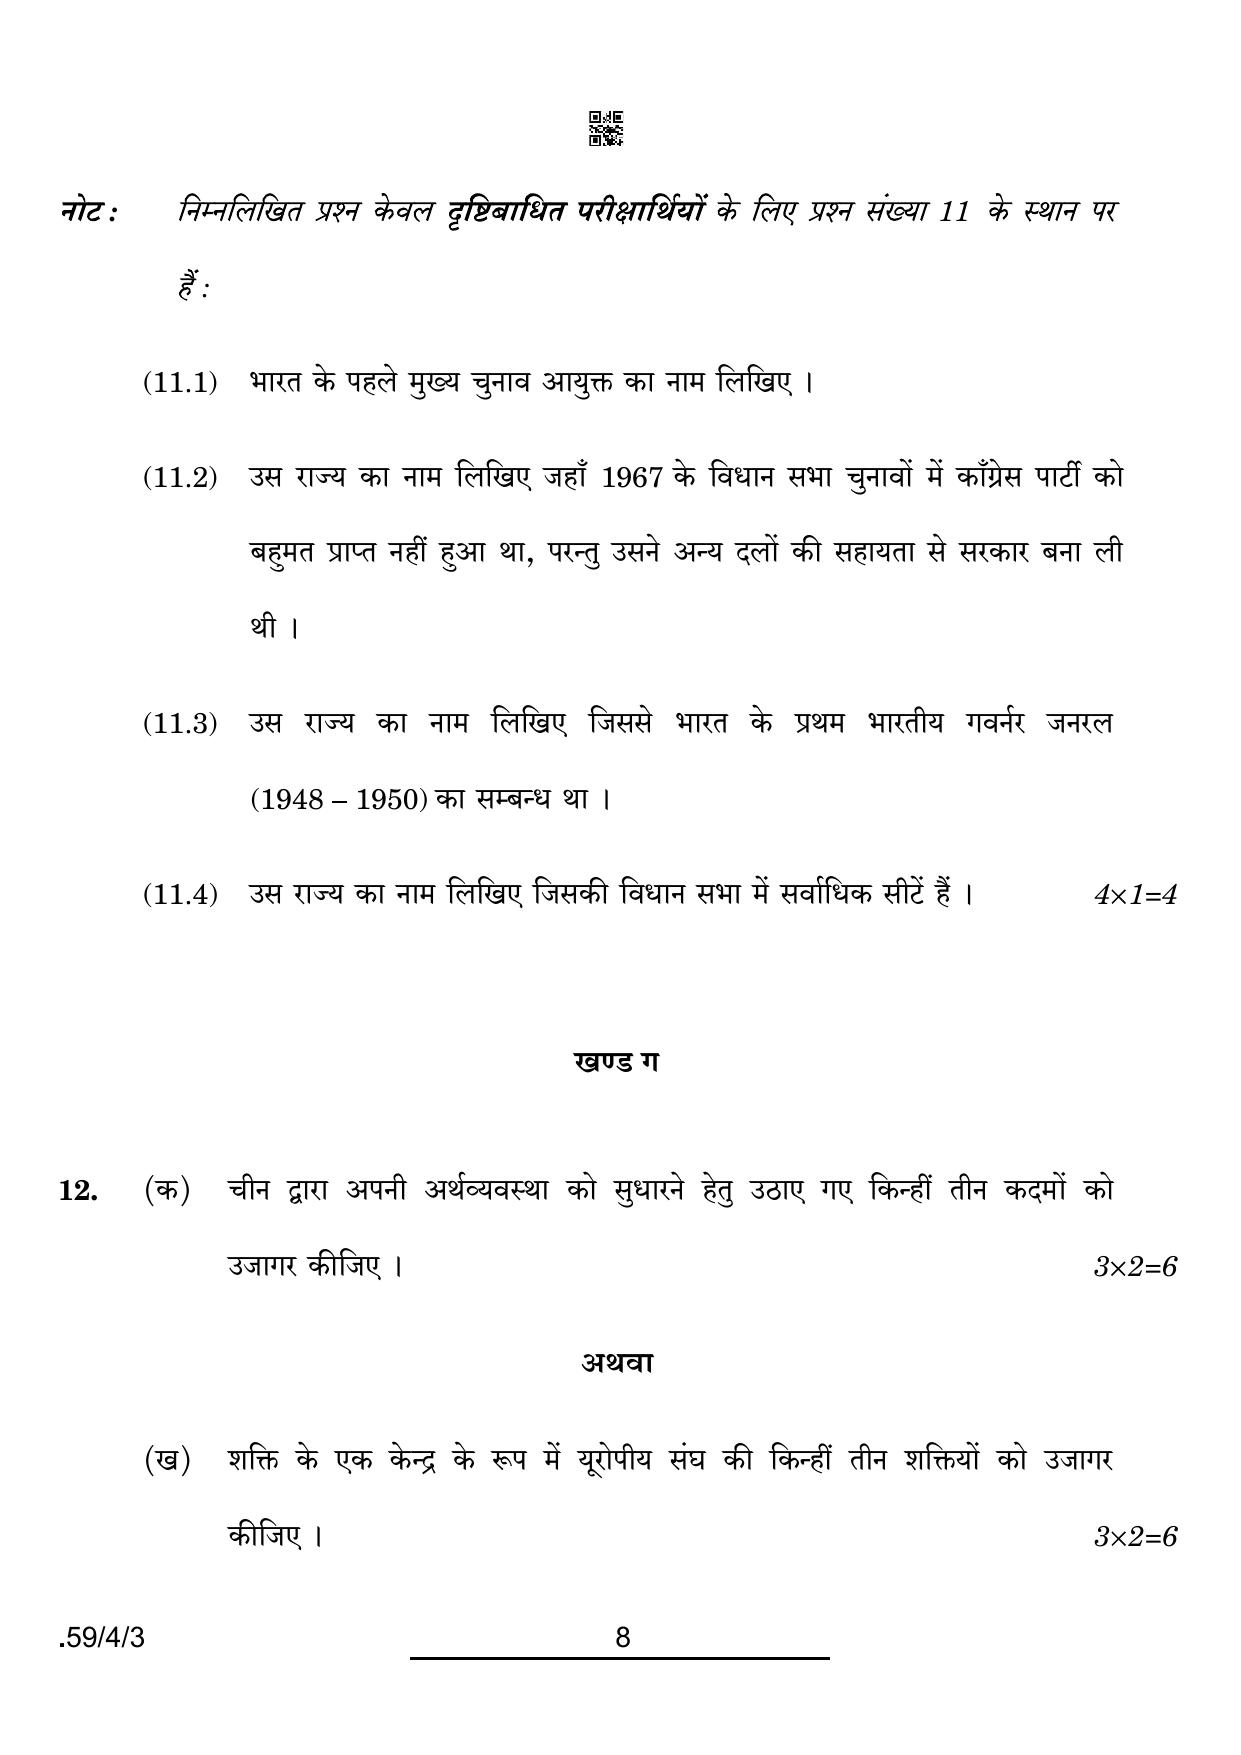 CBSE Class 12 59-4-3 Political Science 2022 Question Paper - Page 8